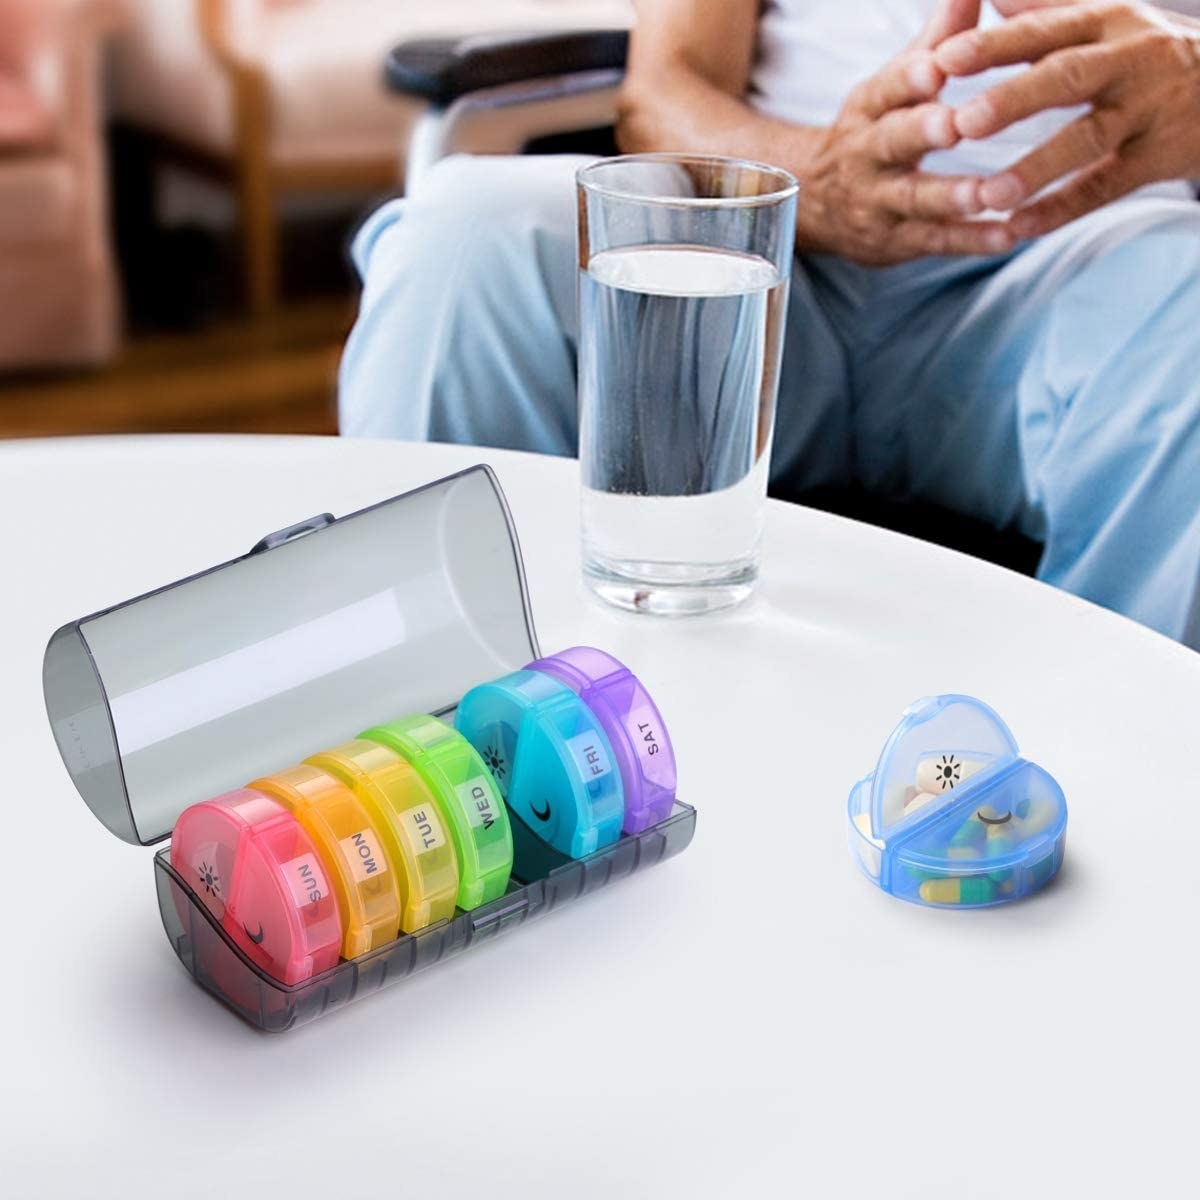 a tubular pill organizer with separate discs for each day of the week